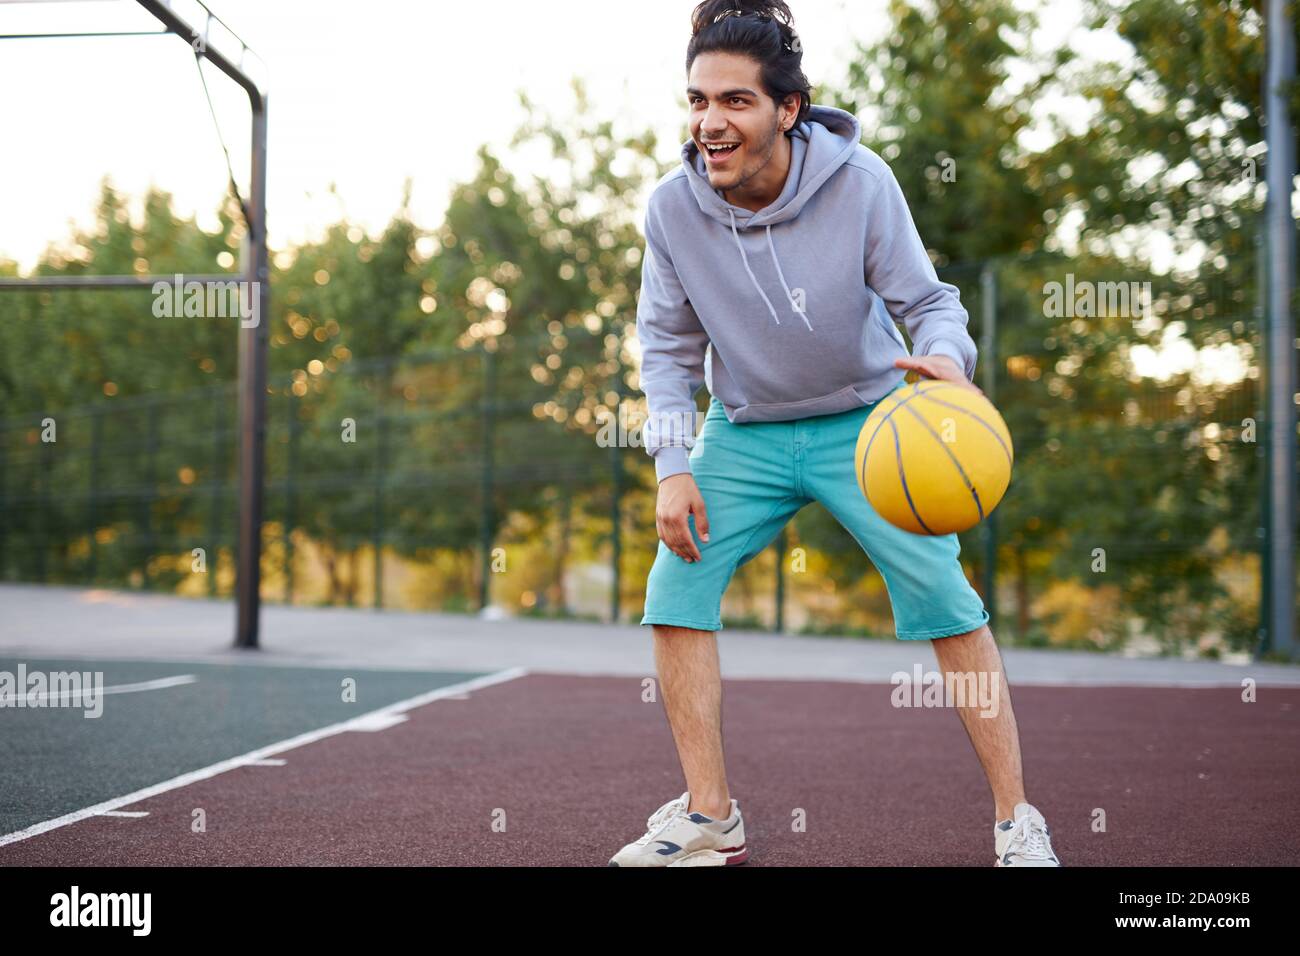 athletic young boy in casual wear keen on basketball, enjoy playing outdoors, sport concept Stock Photo